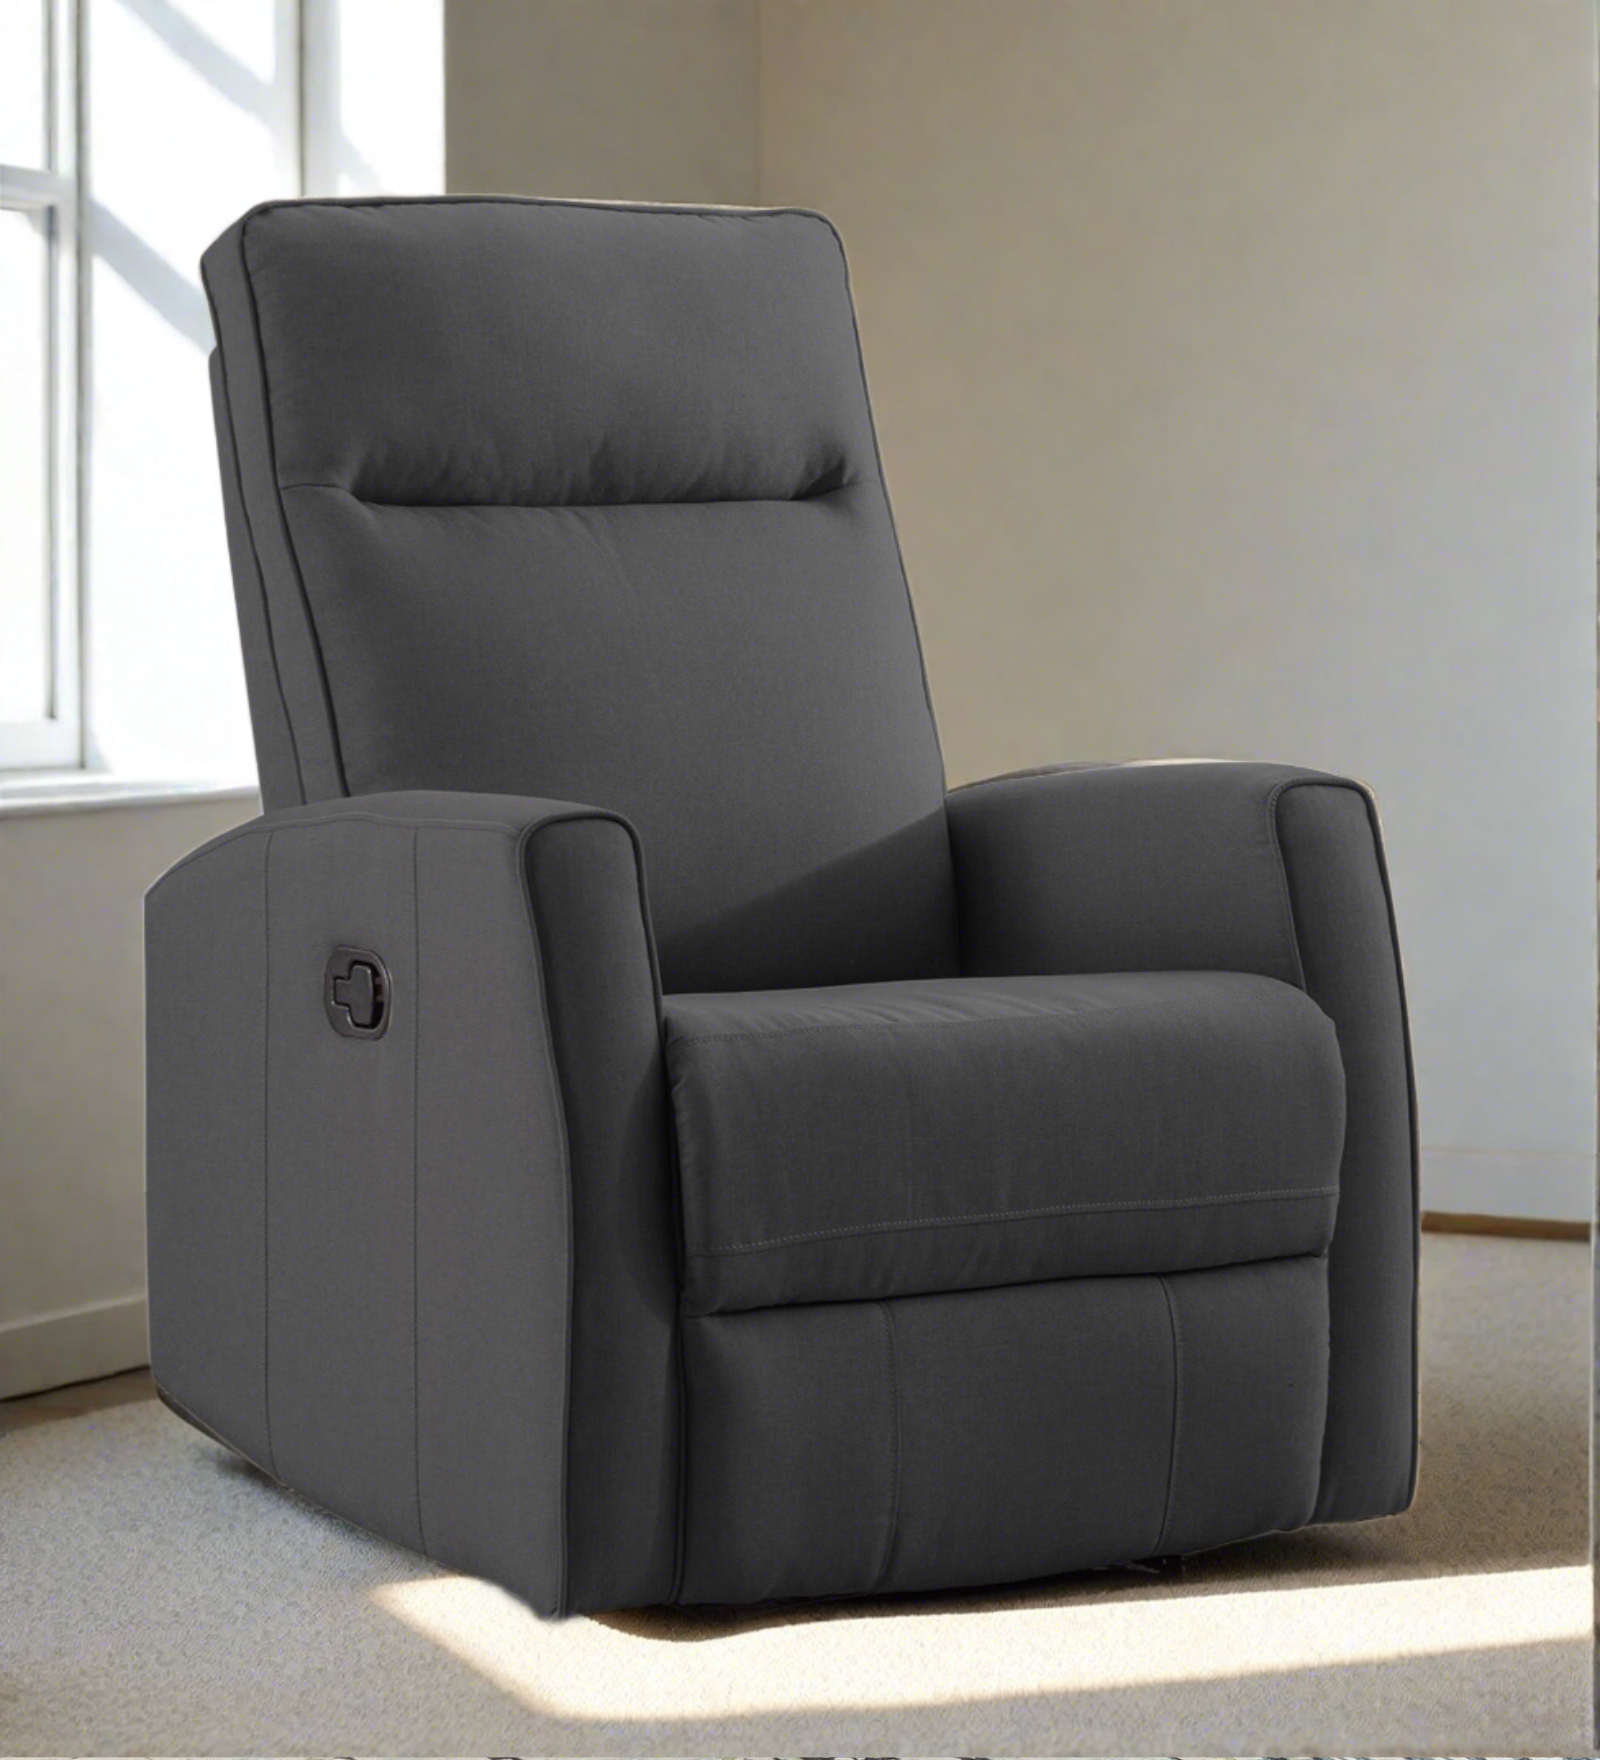 Logan Fabric Manual 1 Seater Recliner In Charcoal Grey Colour